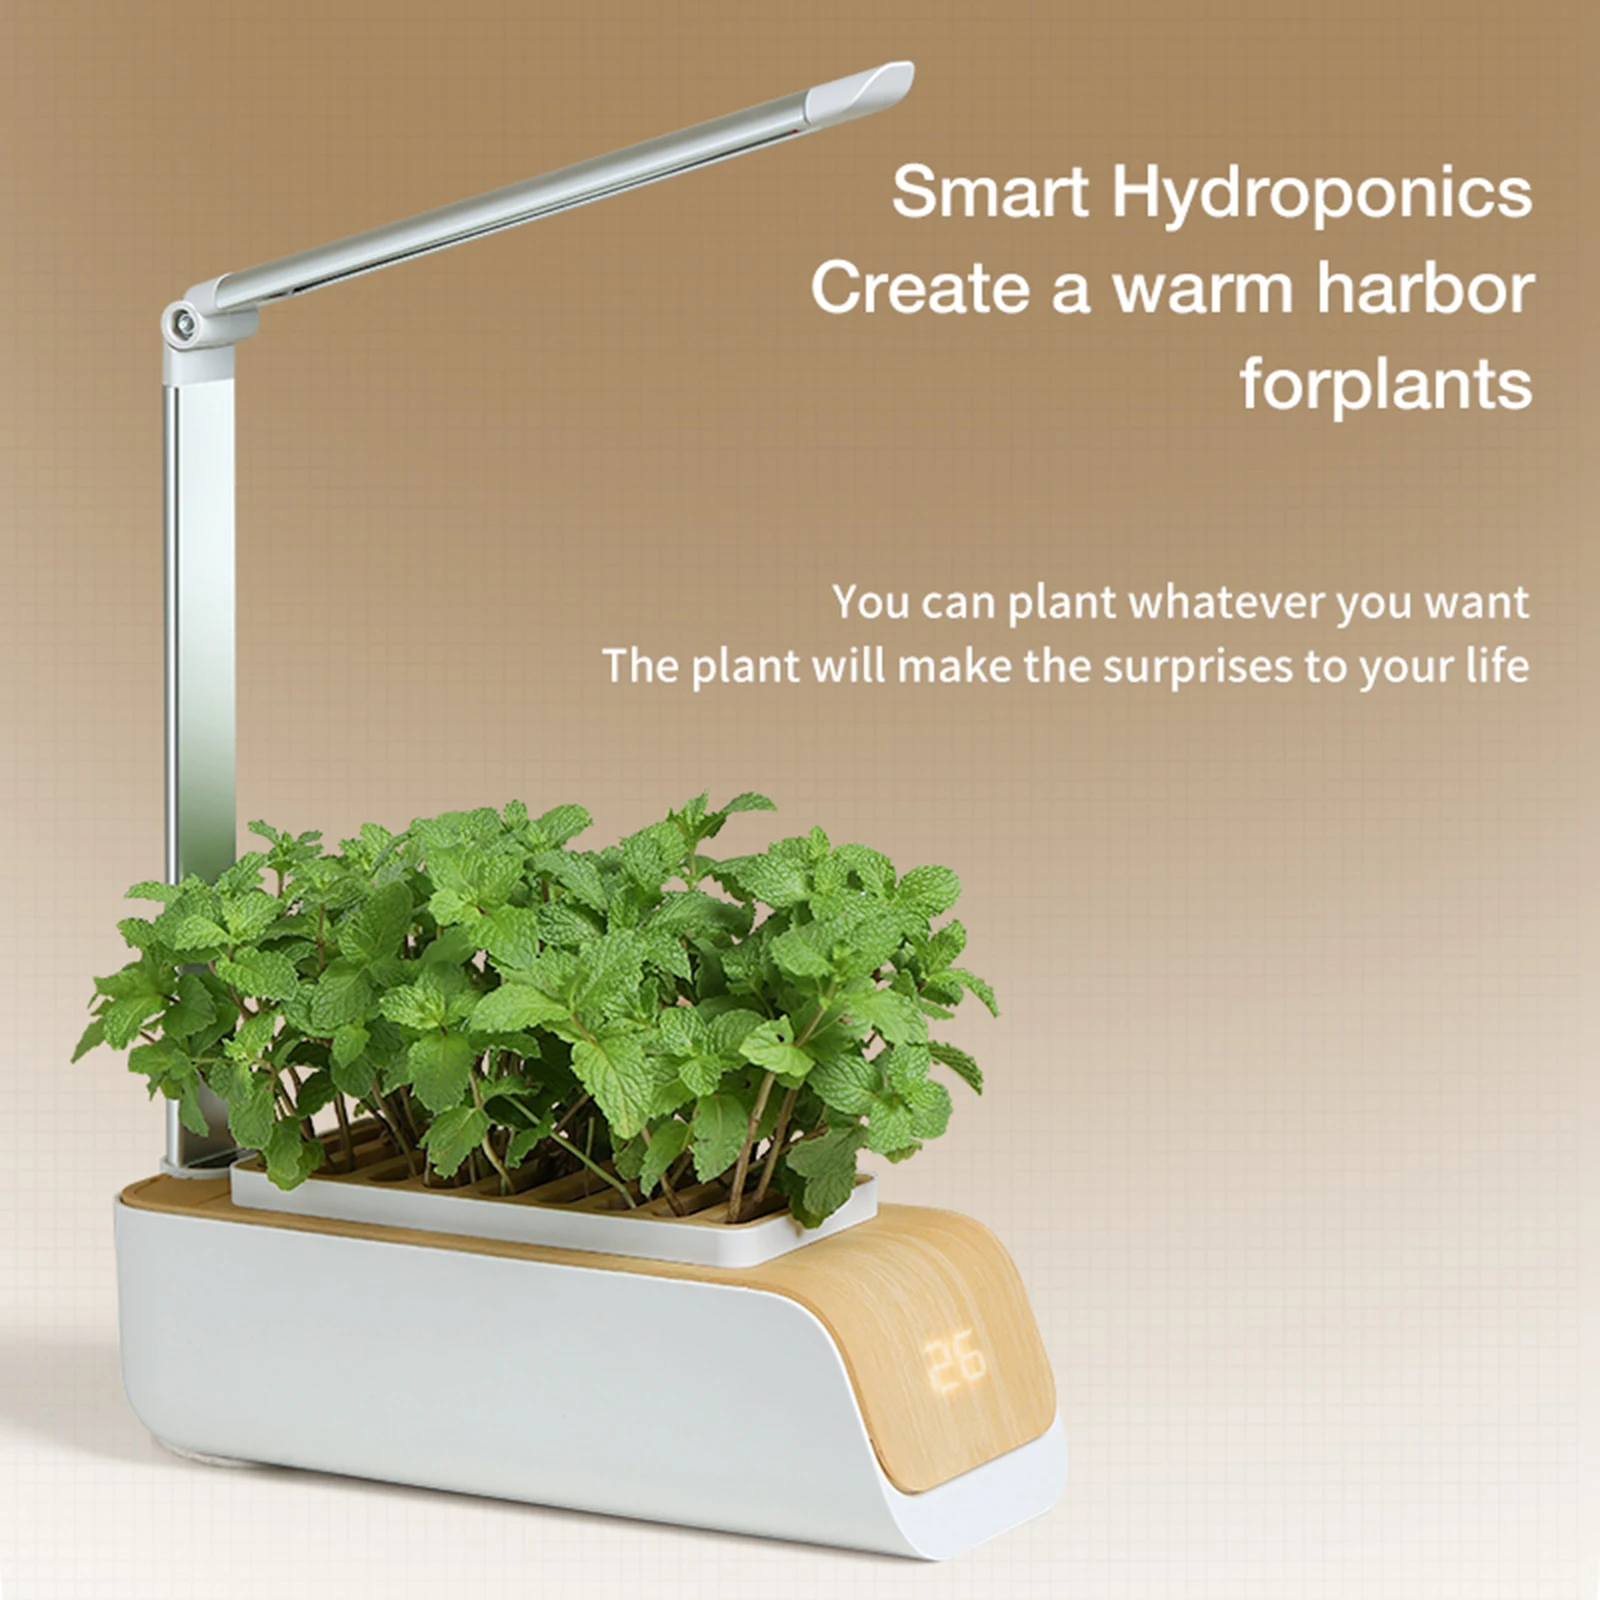 Smart Hydroponic Garden Indoor Herb Gardens Starter Kit Planter LED Grow Light Kit Hydroponic Growing System Grow Light Box Grower Lamps Trend